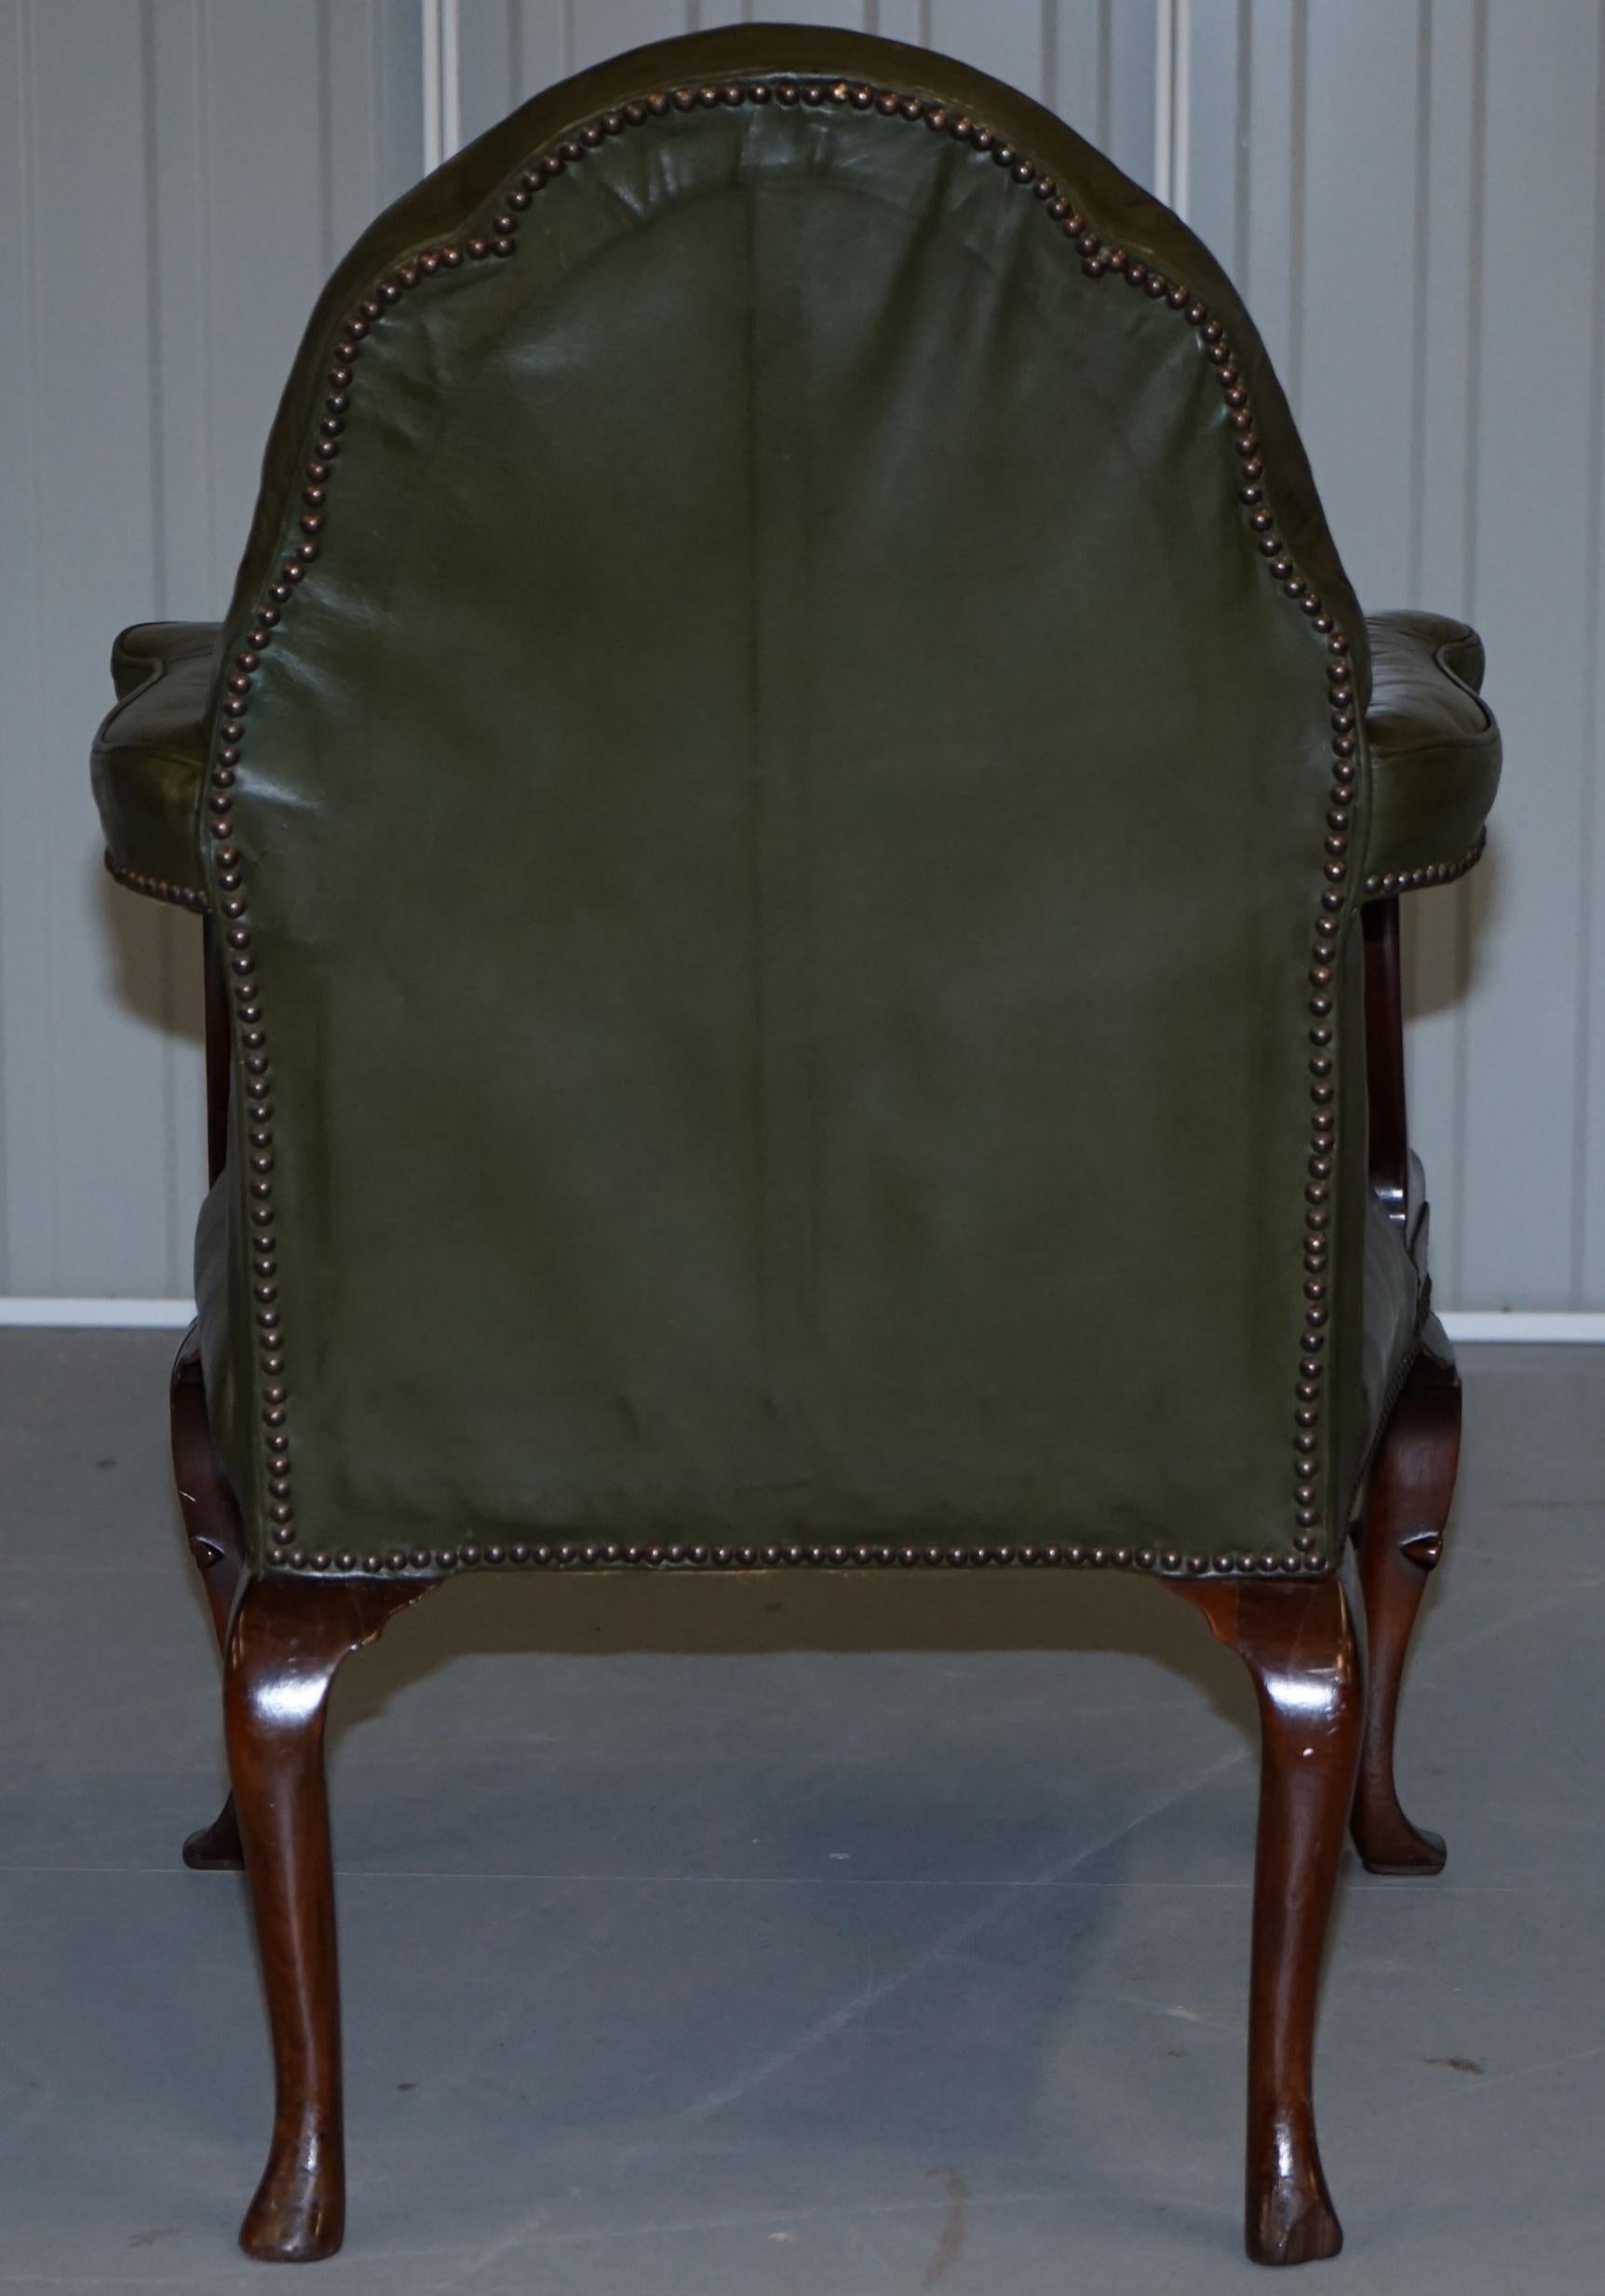 Gothic Revival Georgian Irish Chesterfield Leather Carver Armchair, circa 1800 For Sale 11